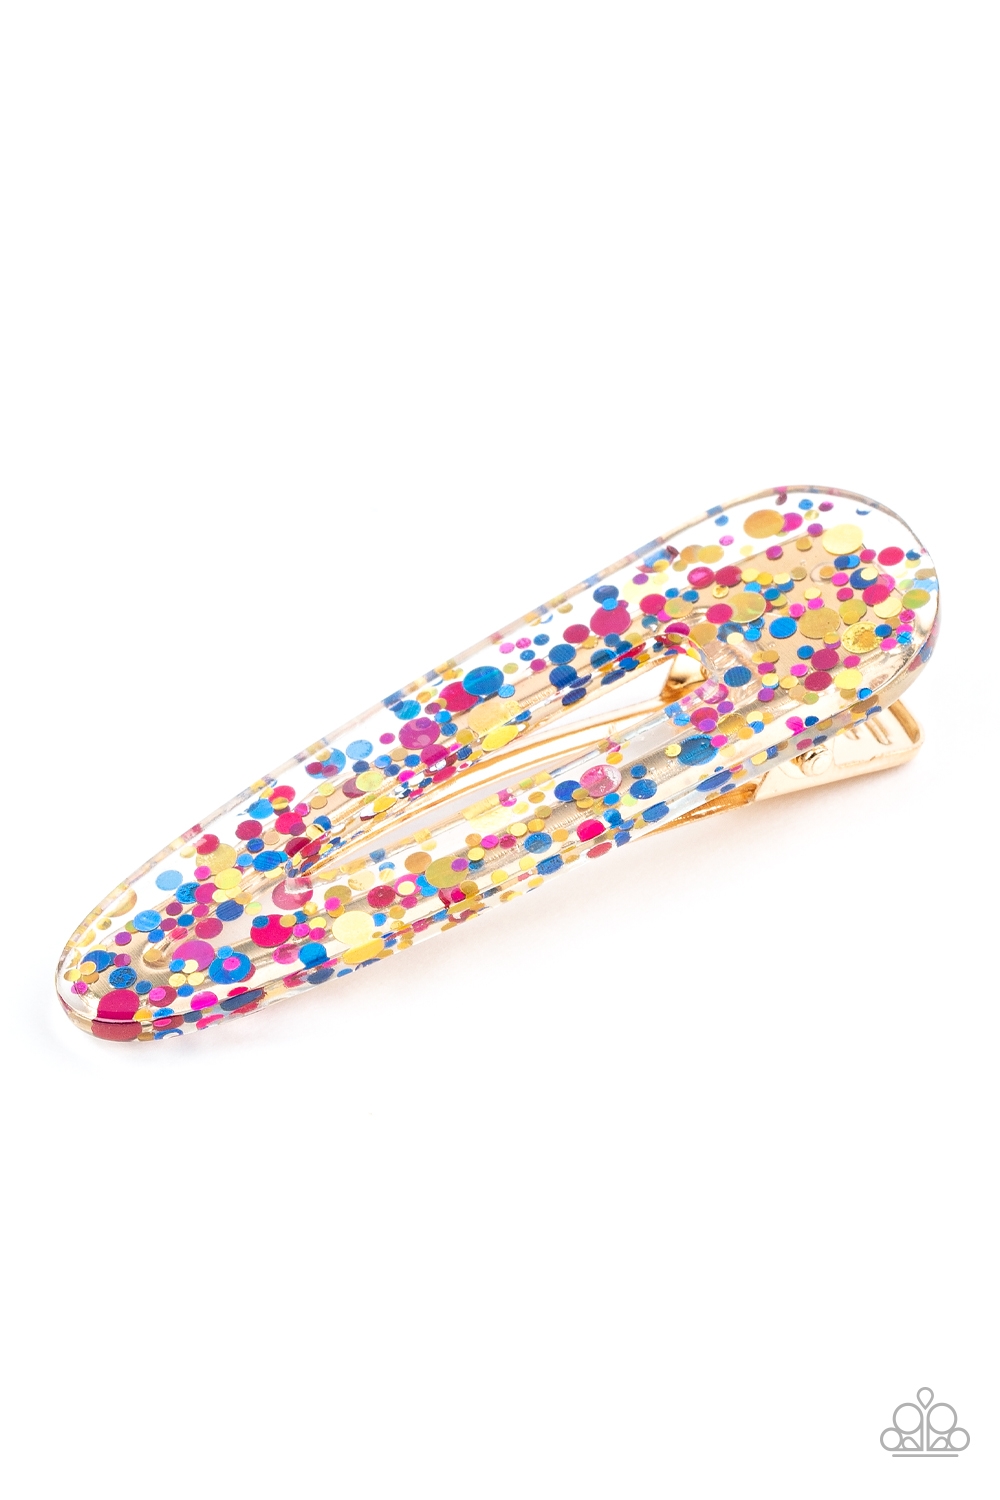 HairClip - Wish Upon a Sequin - Multi